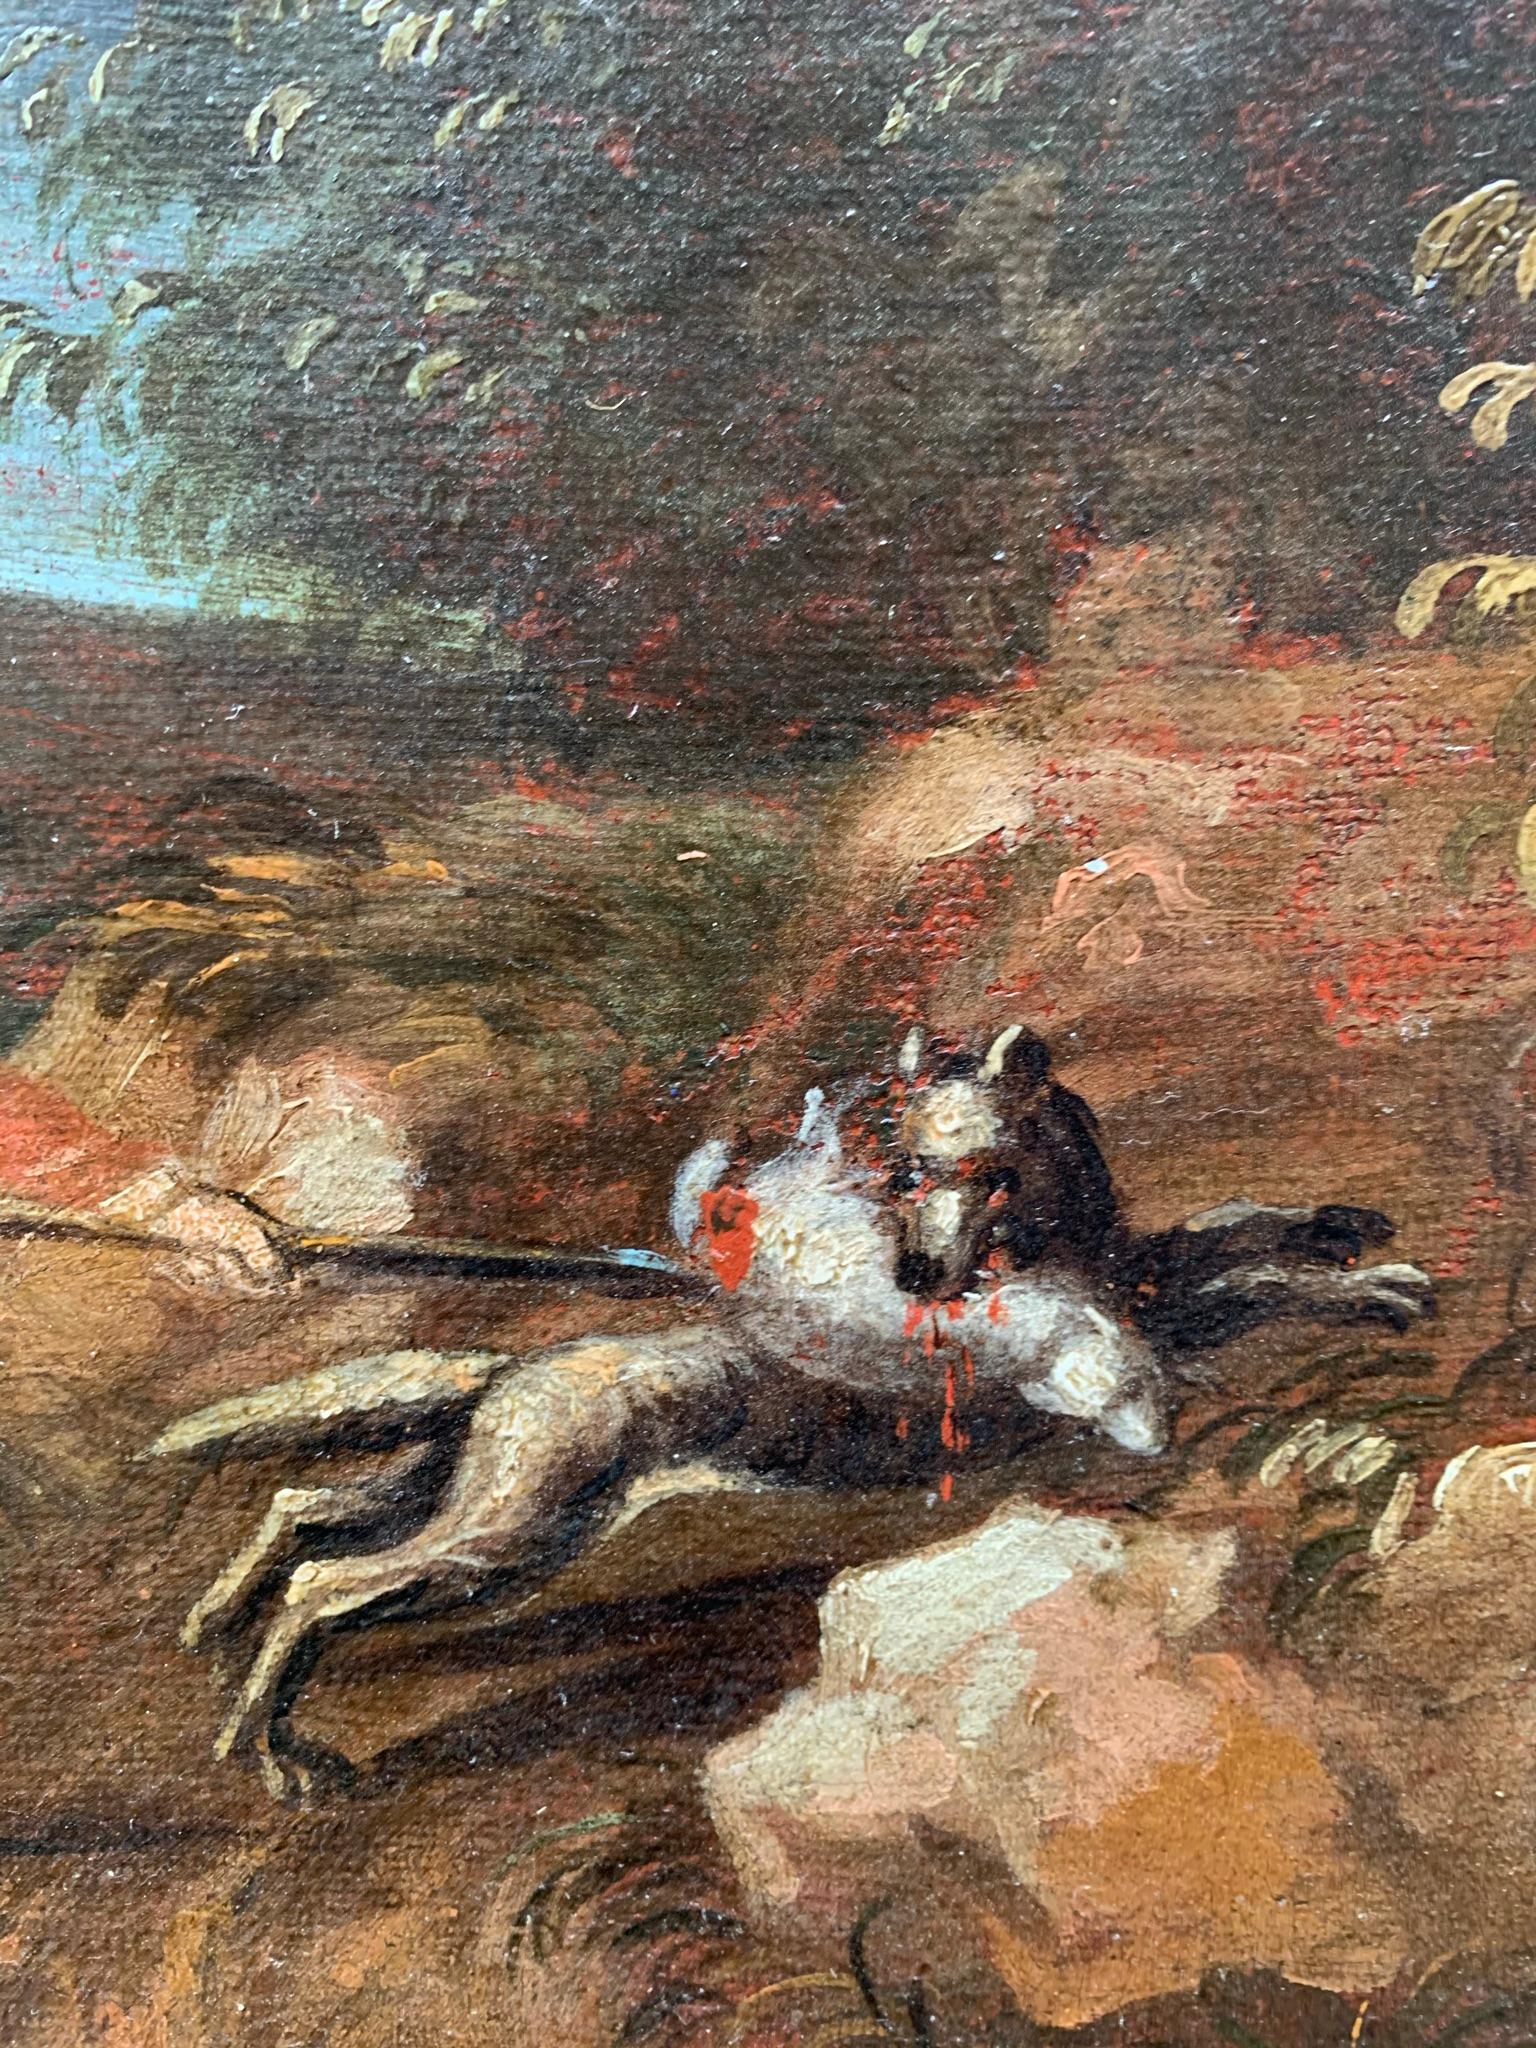 Landscape with hunters by a lake.
18th century.
Oil painting on canvas, from the French or Northern Italian school, Louis XV period.
Probably part of the door decoration in an interior of a villa in the countryside.

During the restoration, the